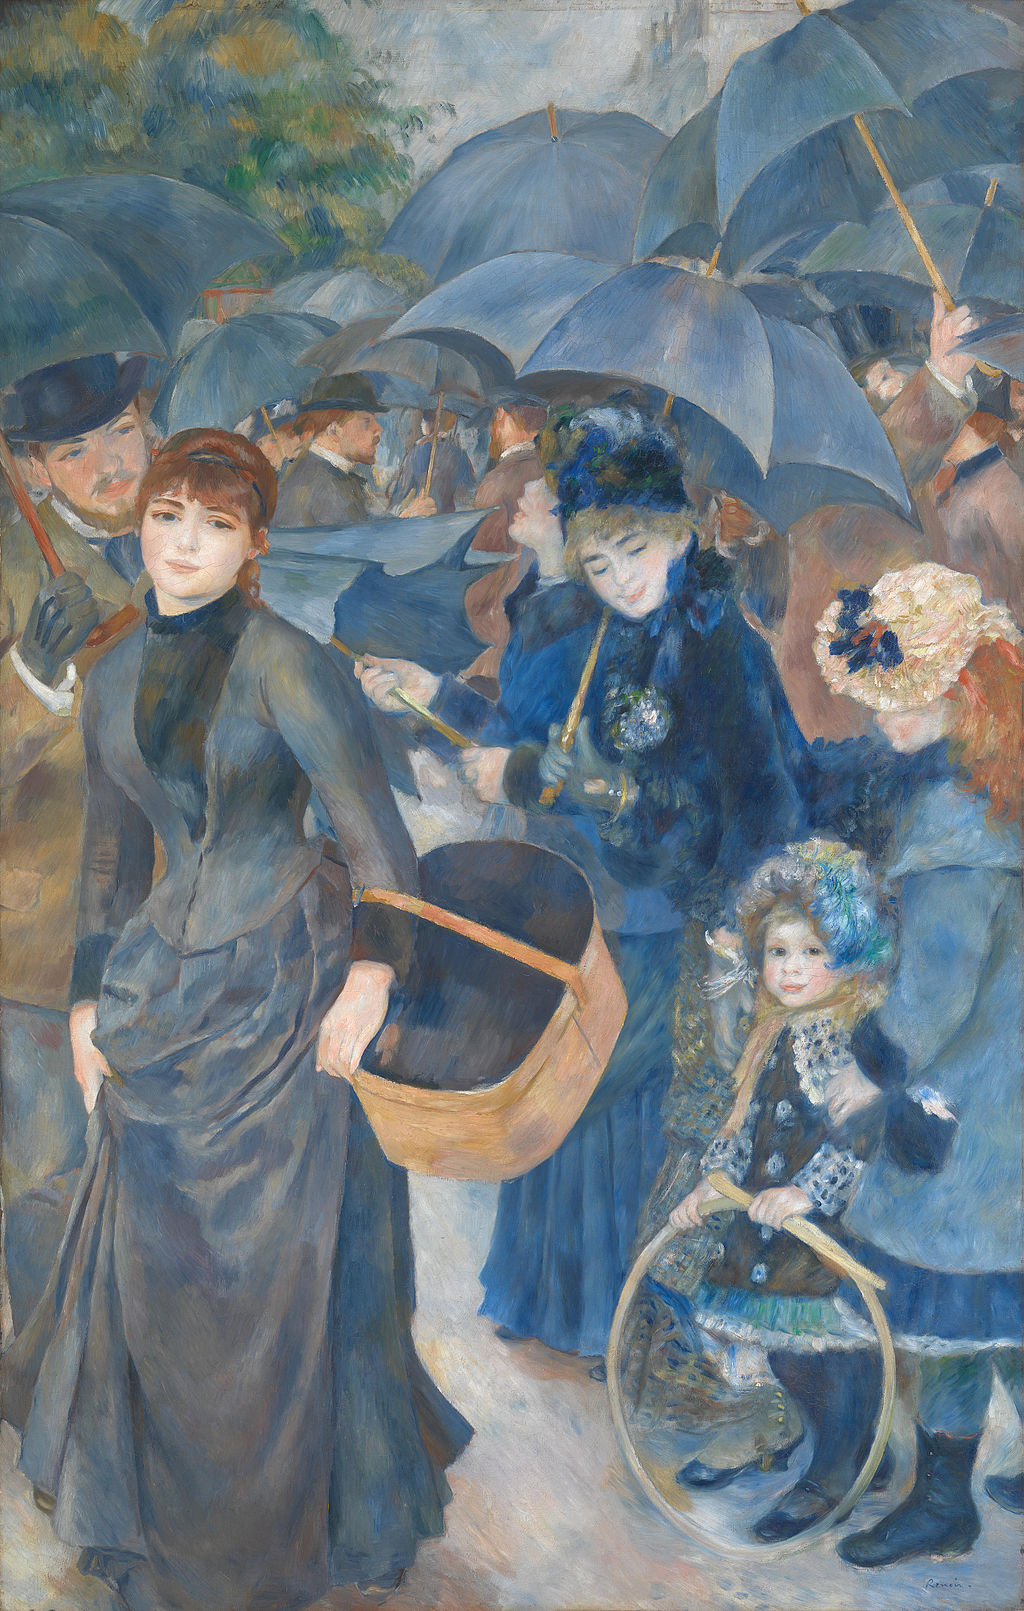 The Umbrellas by Pierre-Auguste Renoir Reproduction for Sale by Blue Surf Art